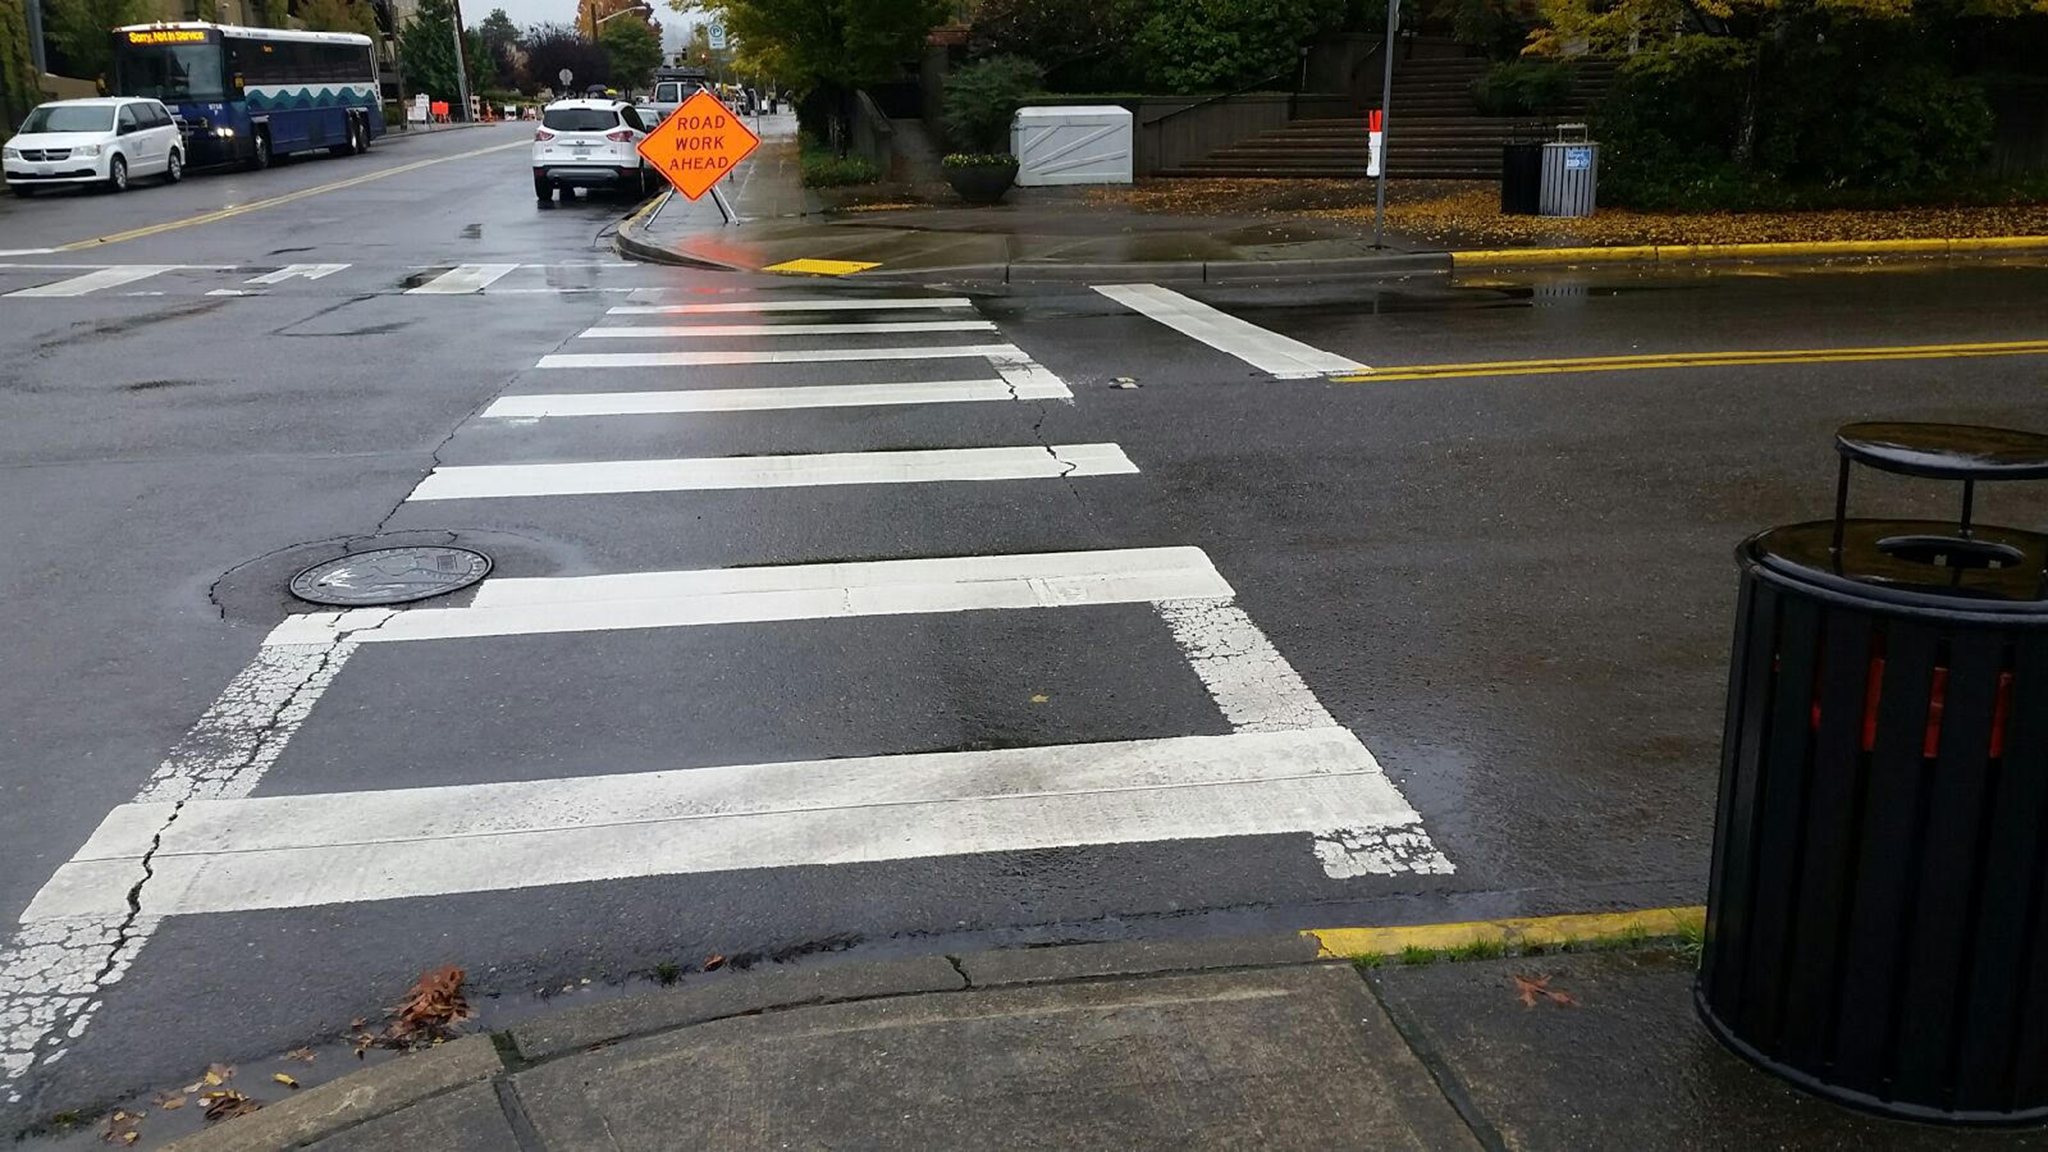 The City of Auburn receives many requests to mark crosswalks every year, but traffic engineers say evidence shows they often they do more harm than good.Robert Whale, Auburn Reporter